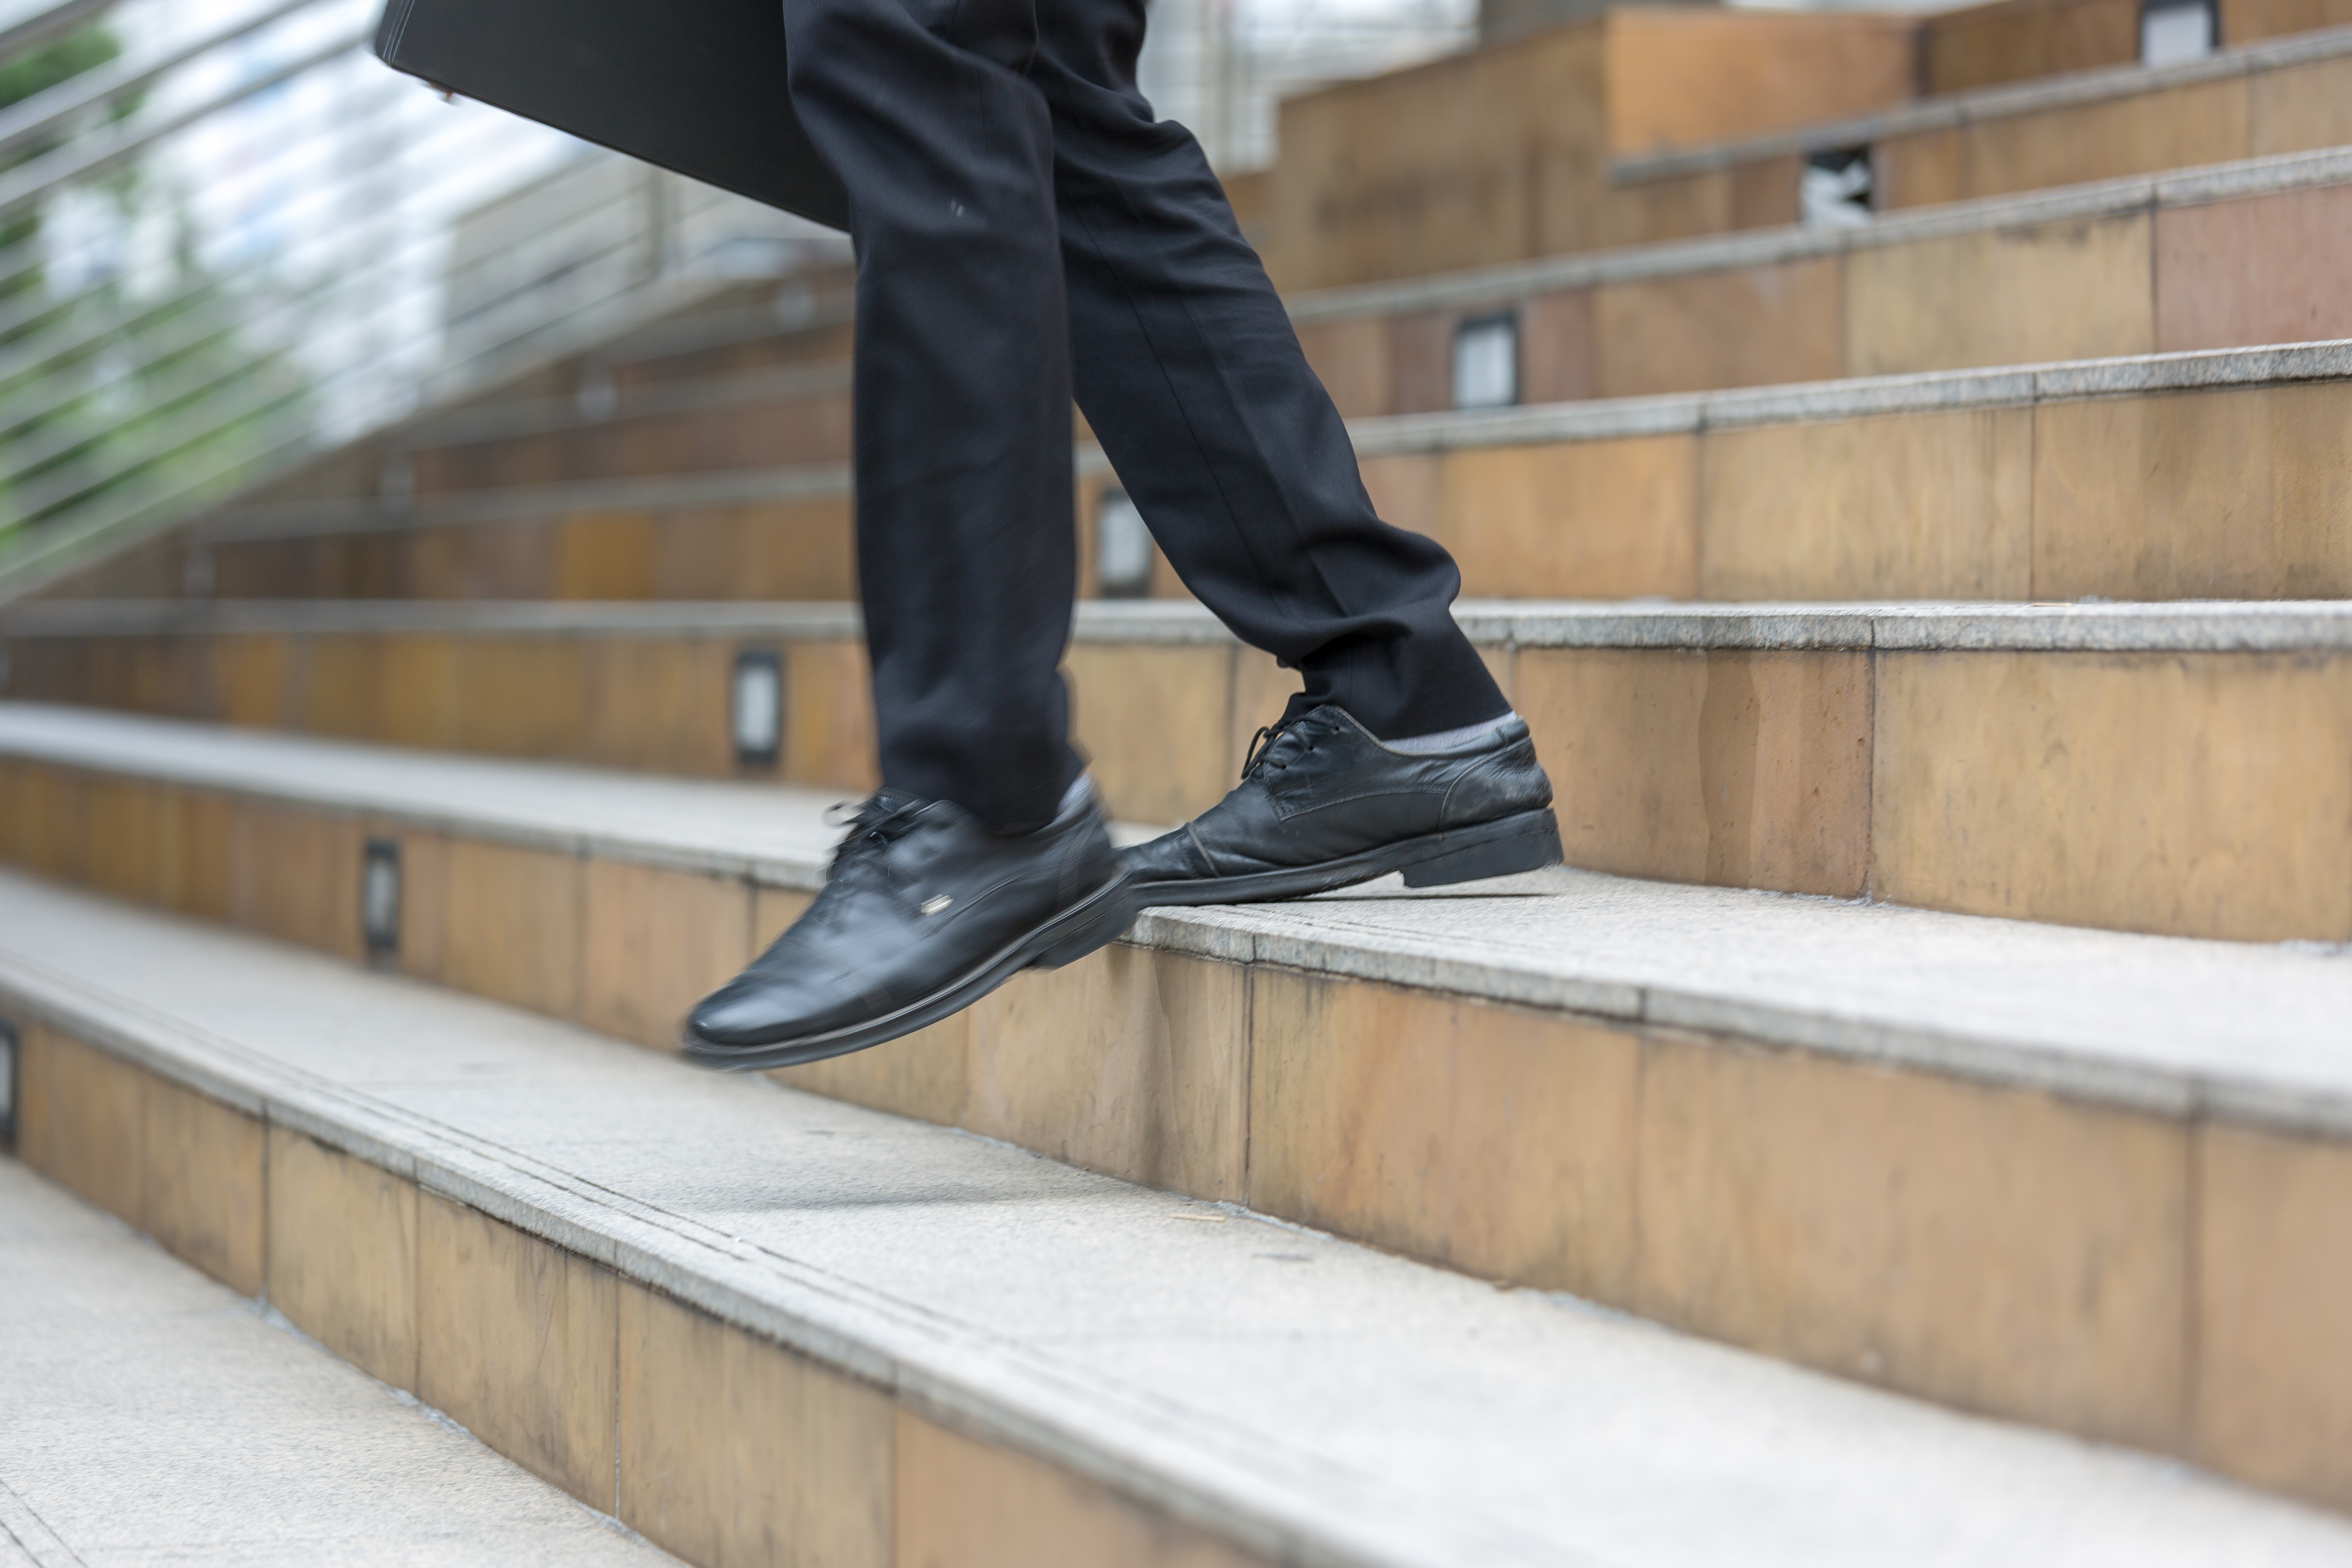 Bussiness person walk downstair in hurry movement. | Source: Shutterstock